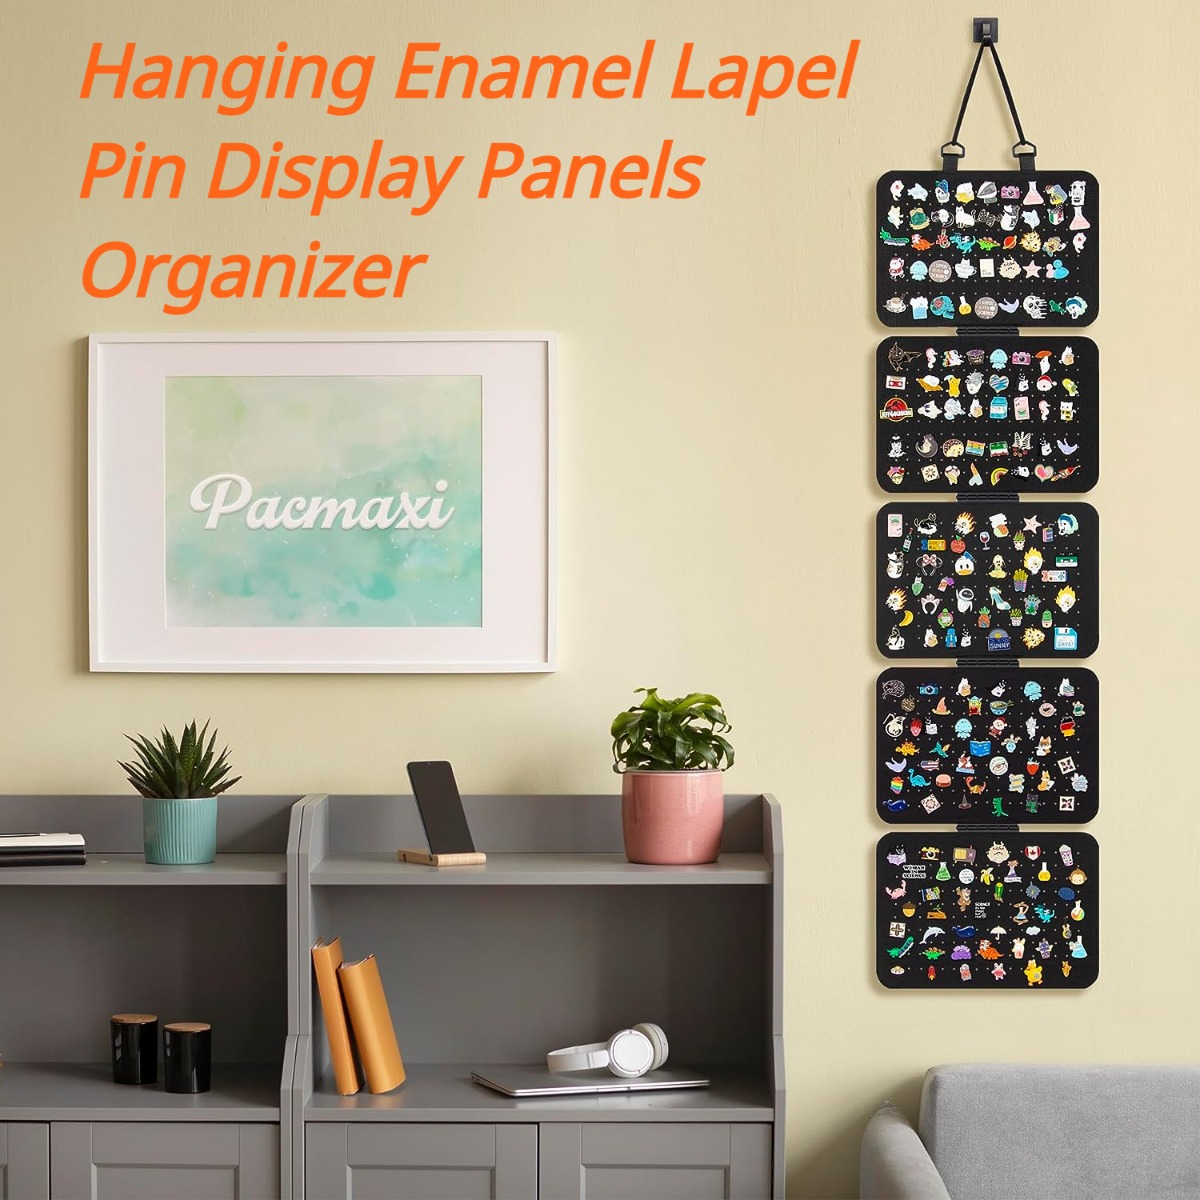 

Hanging Enamel Lapel Pin Display Panels Organizer With 5 Loose-leaf Board Pieces, Brooch Pin Enamel Pin Display Pages, Badge Collection Display Holder Holds At Least 120 Pins (pins Not Included)